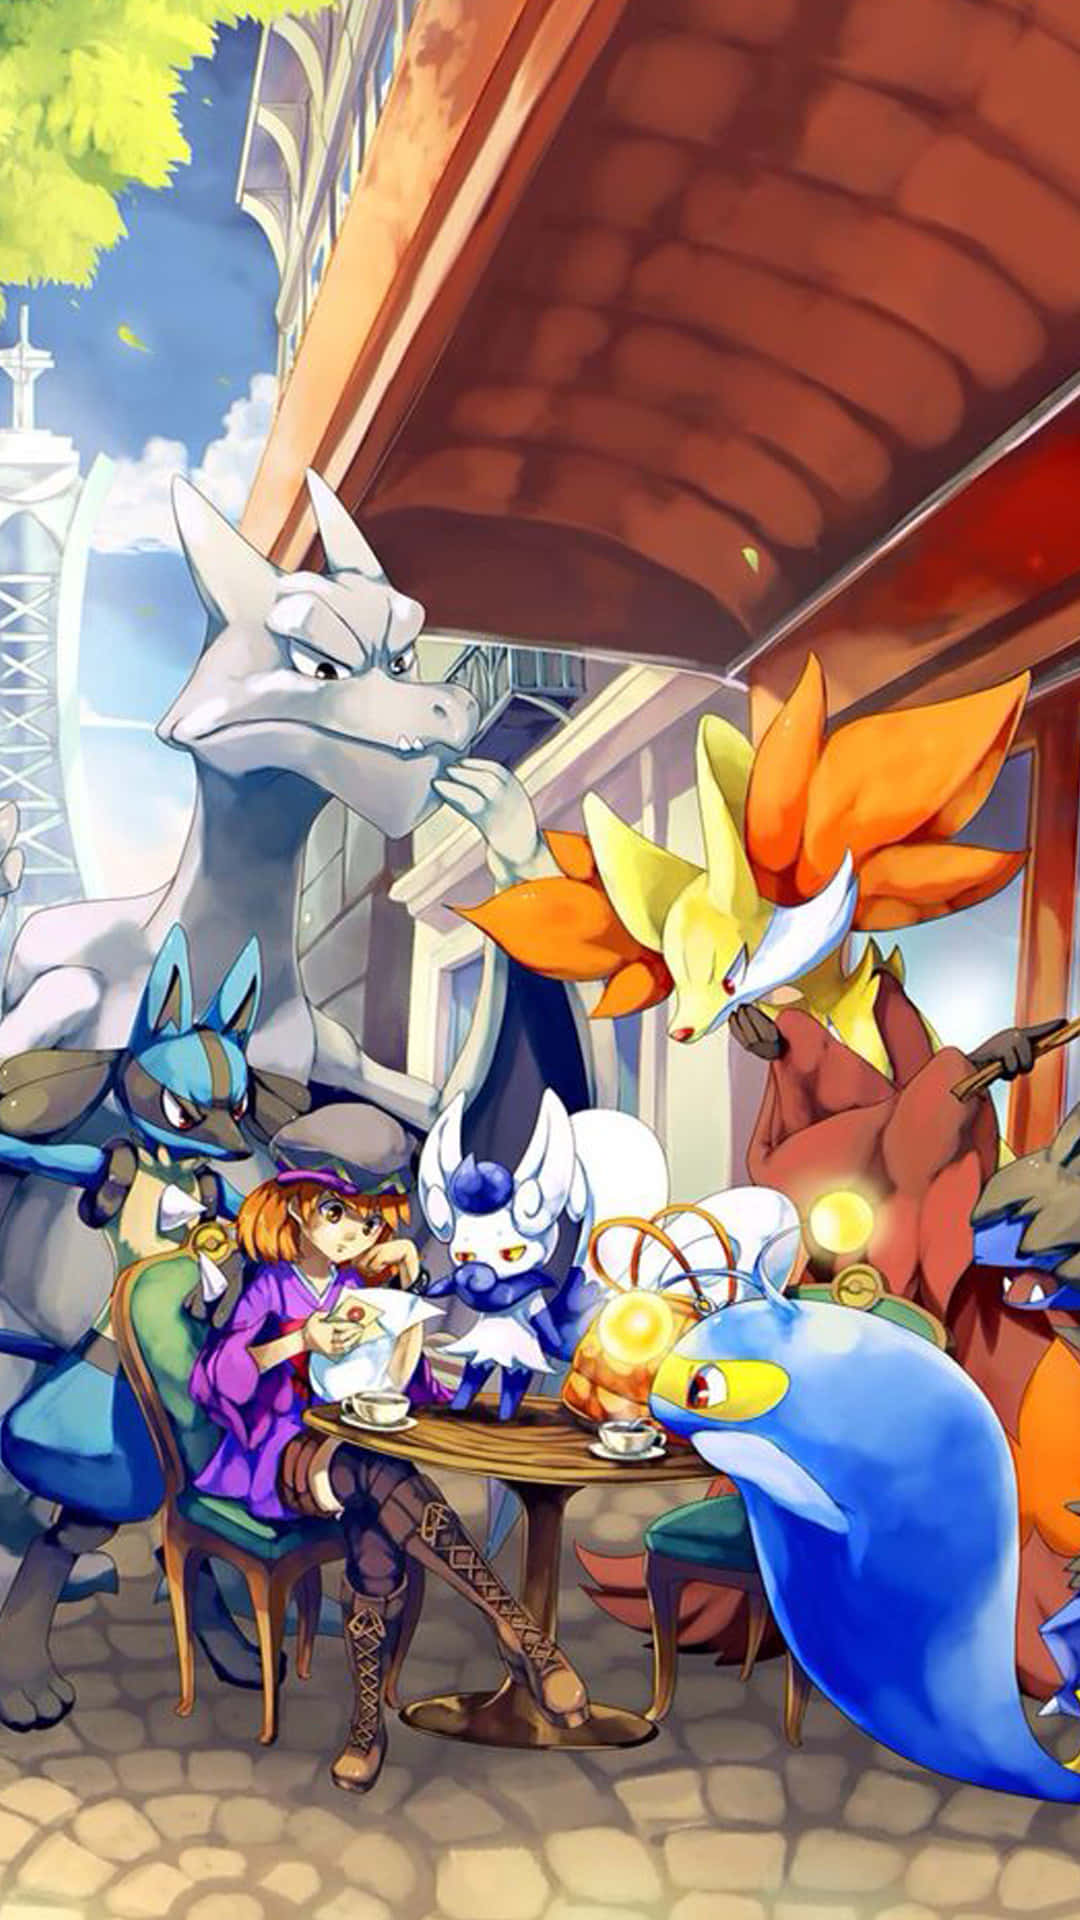 Explore the World of Pokémon with this Fun Fan Art Wallpaper